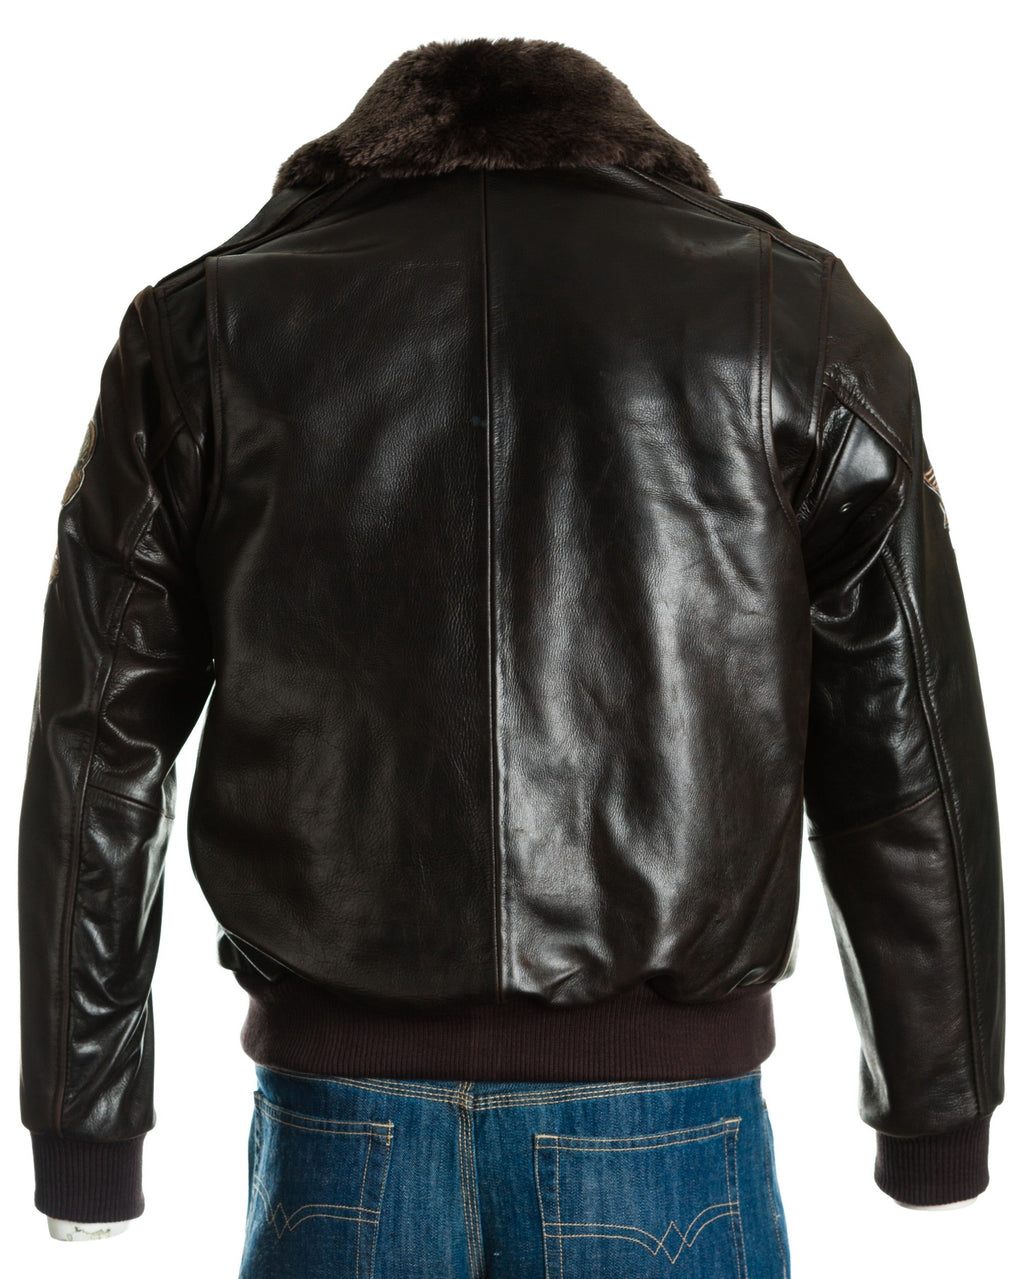 Men's Brown Aviator Pilot Flight A2 Style Leather Jacket With Patch Detail And Detachable Faux Fur Collar: Giuseppe